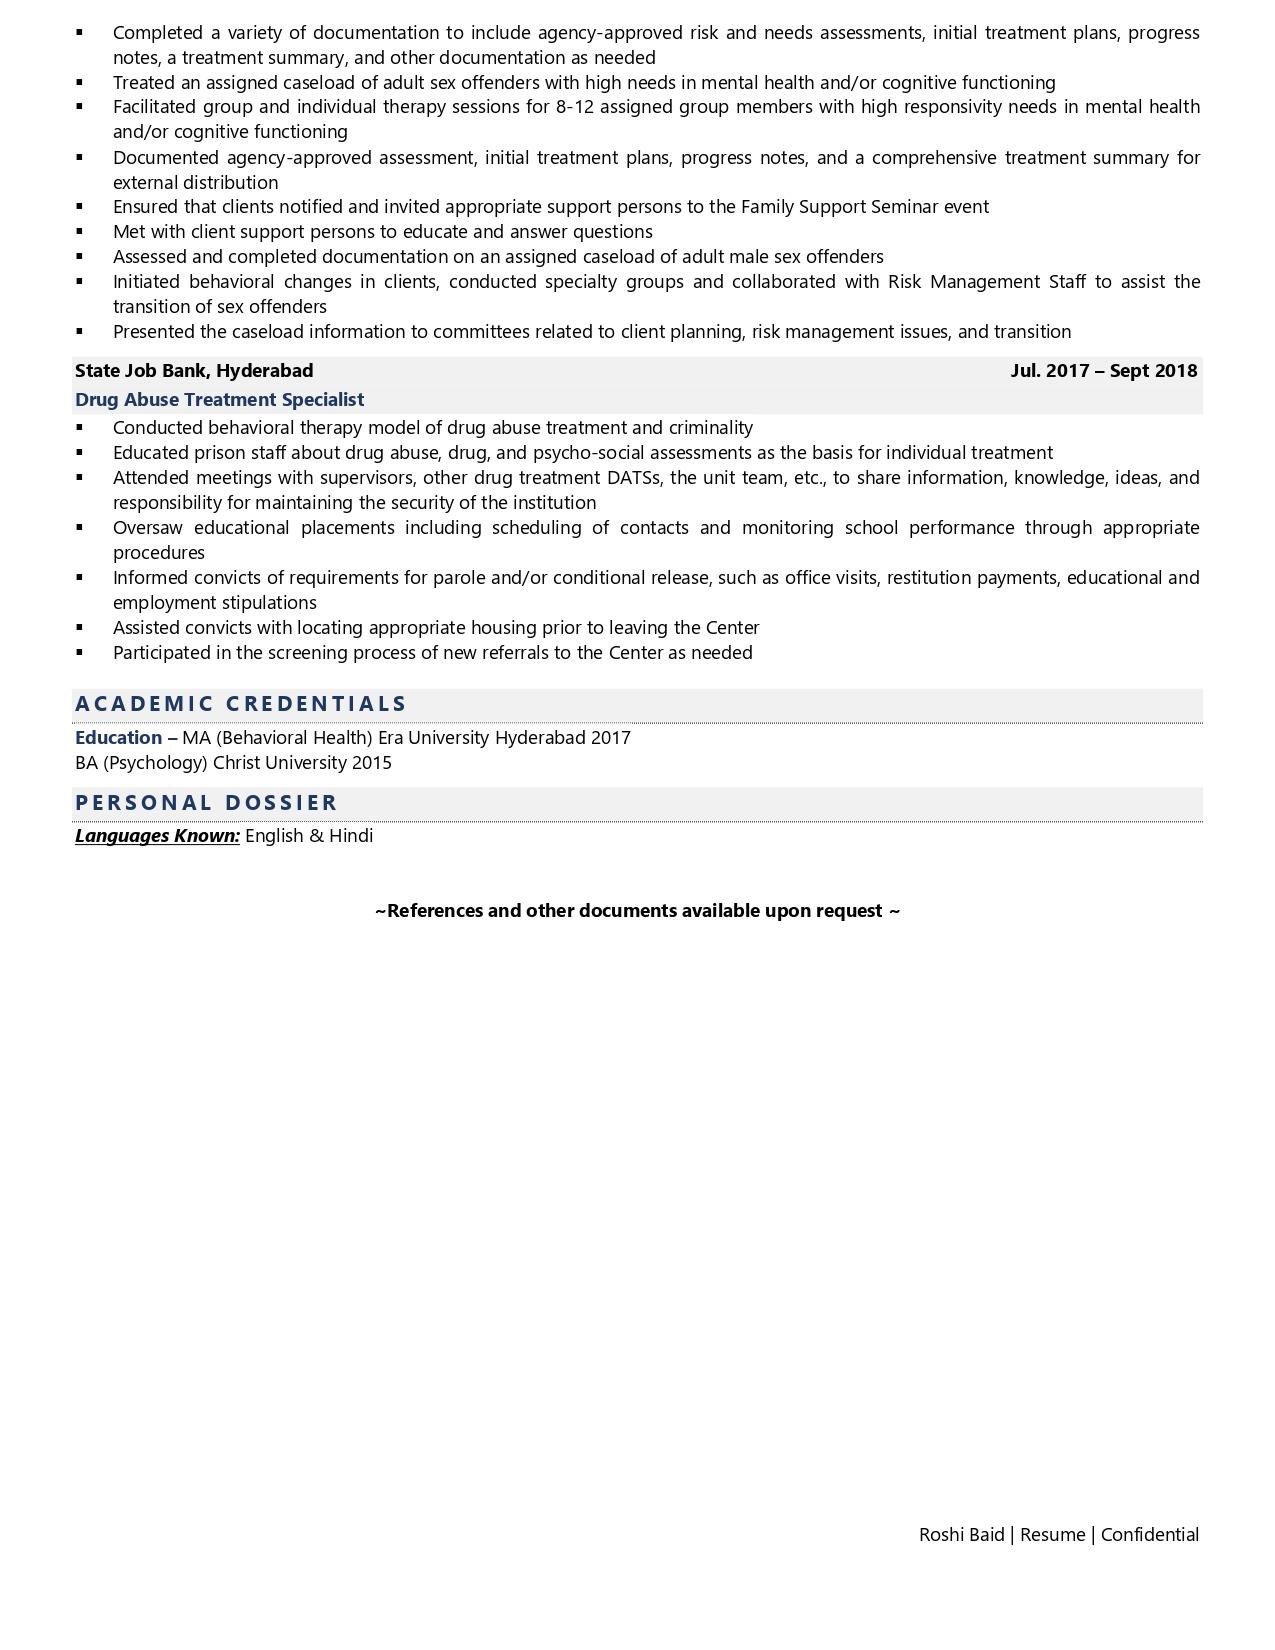 Correctional Treatment Specialist - Resume Example & Template